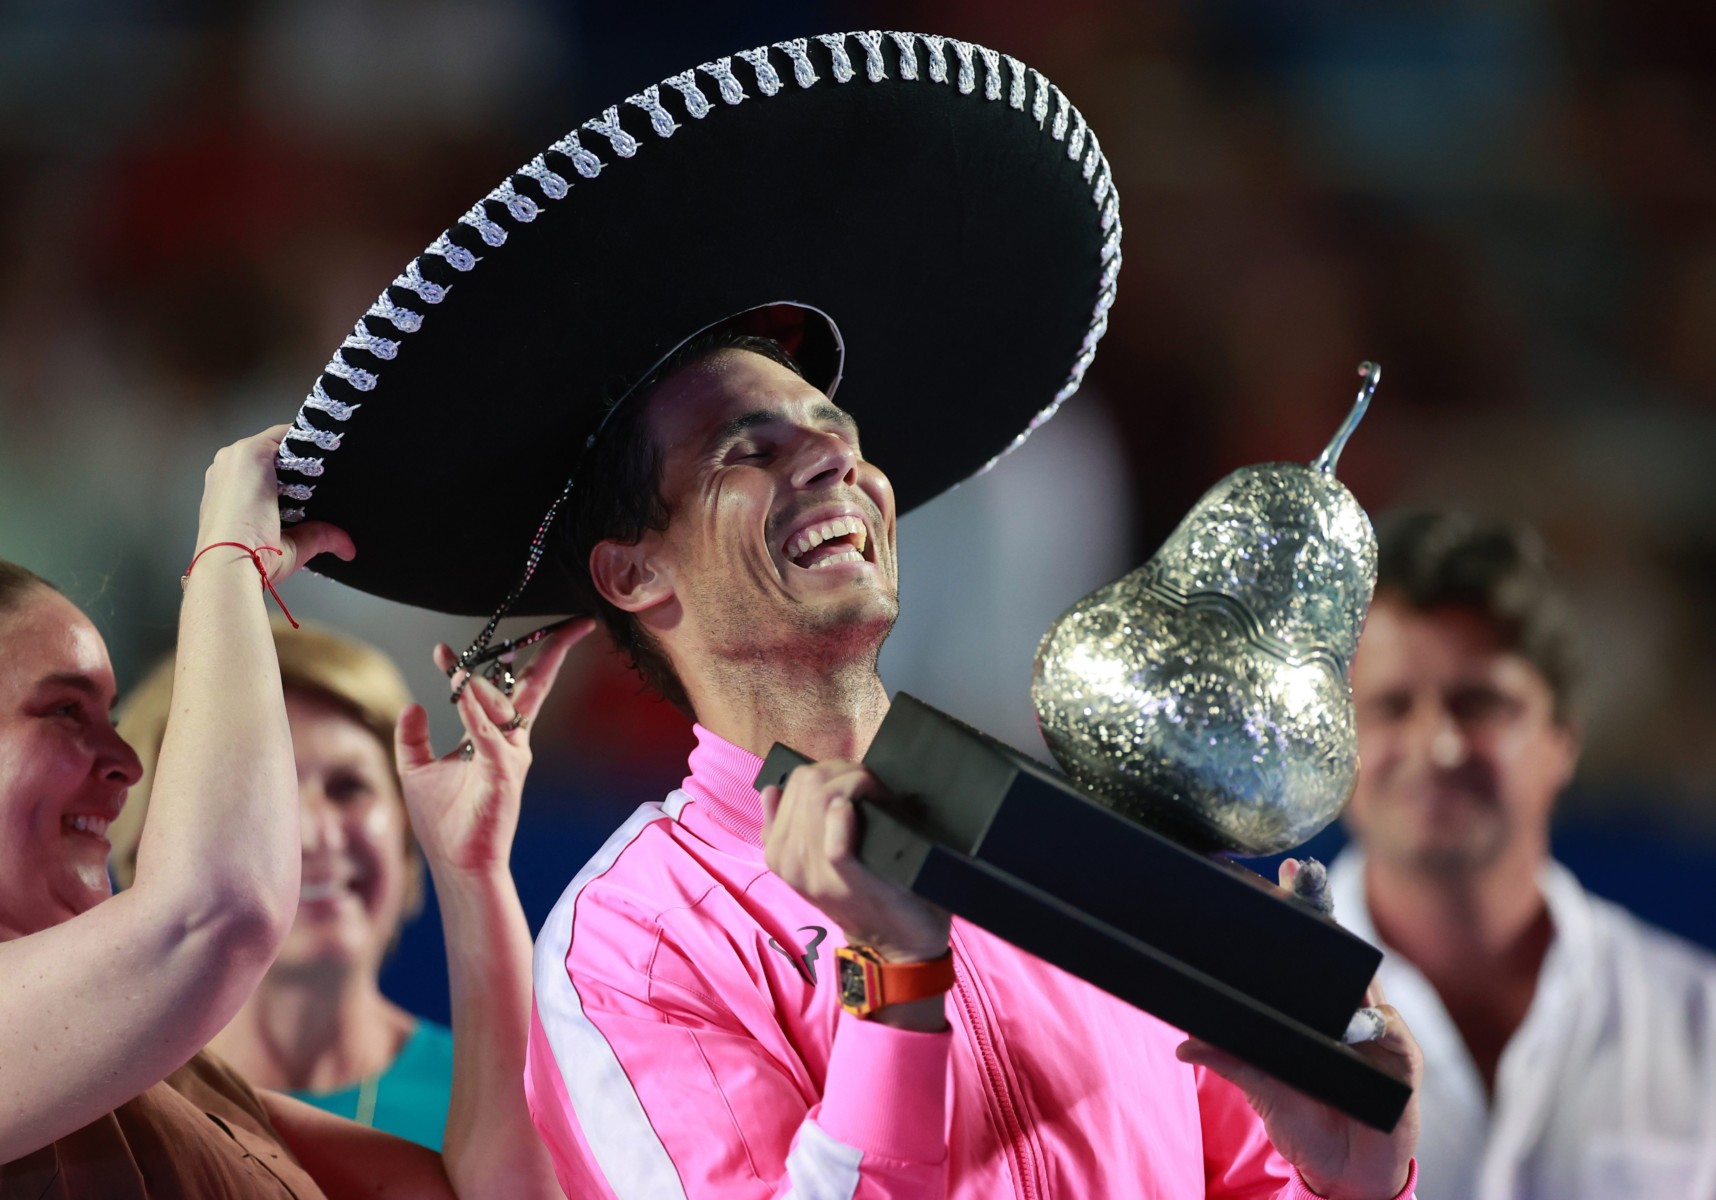 Rafael Nadal dons his sombrero after winning a hat-trick of titles at the Mexico Open